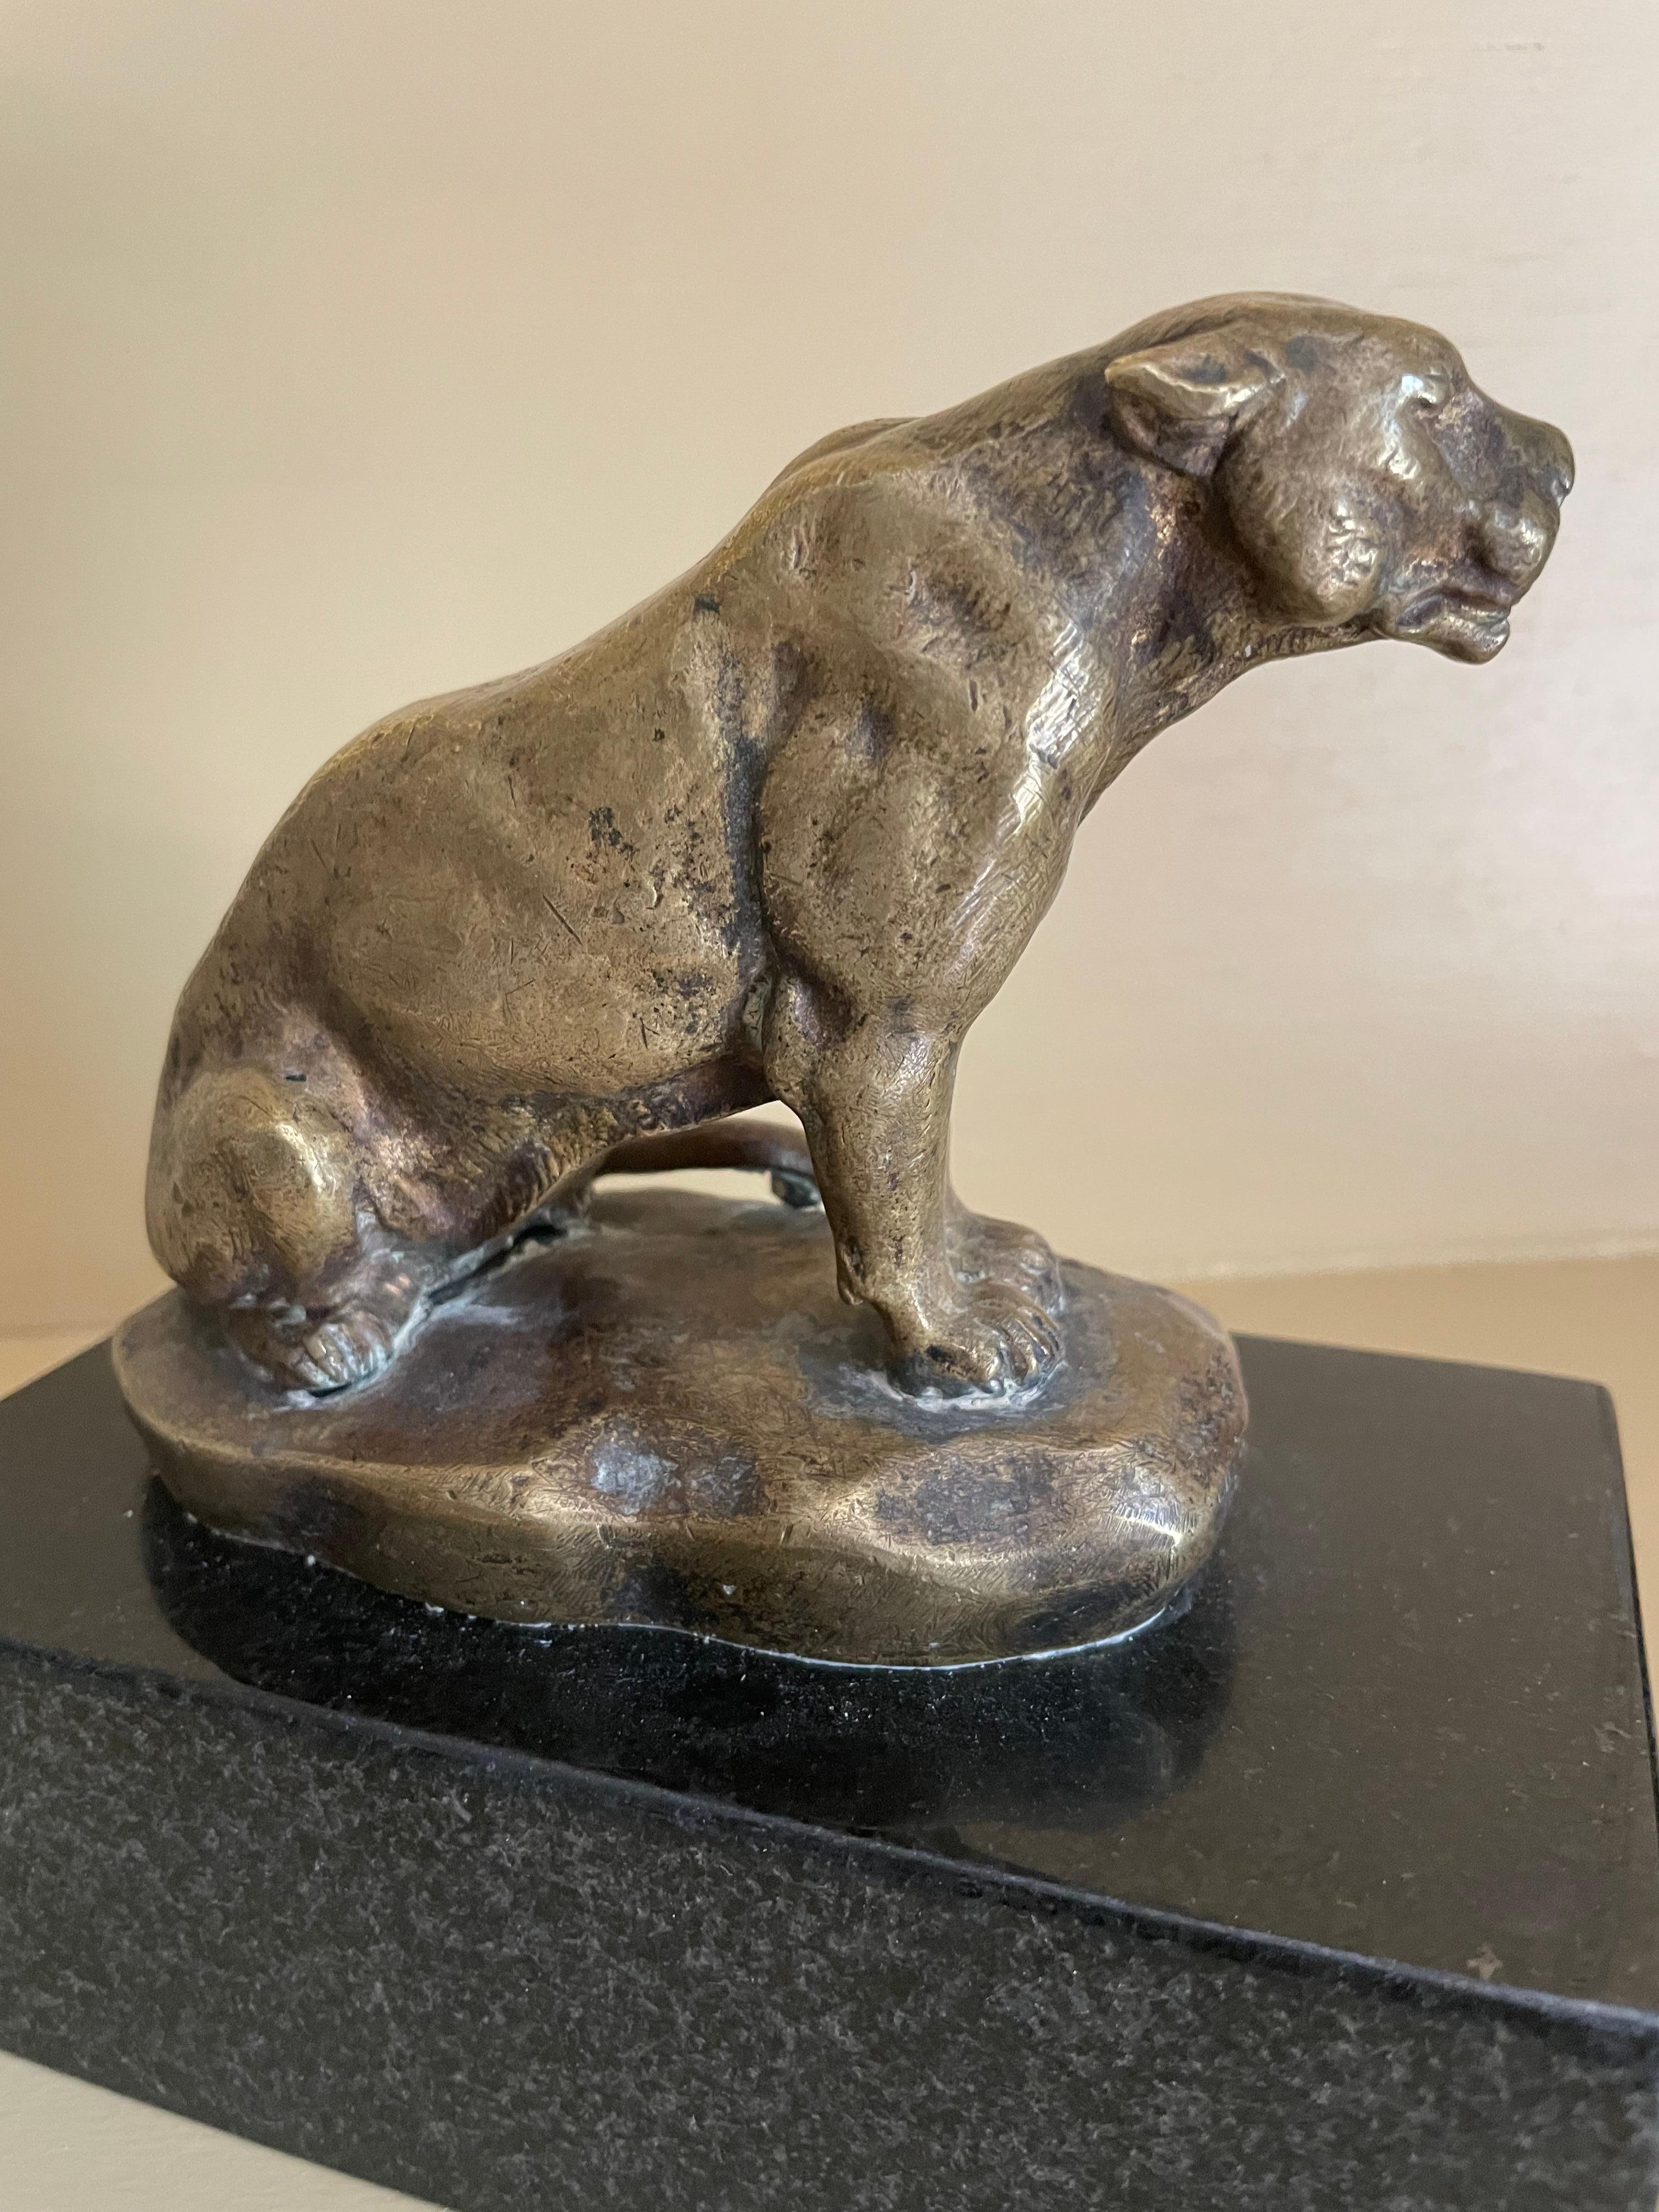 C. Masson Gilt bronze Panther Sculpture. Seated panther in soft gilt patinated bronze on modeled rock base by the French animal sculptor Clovis Edward Masson 1838-1913., on black marble plinth. France, circa 1930's
Dimensions: Panther: 5